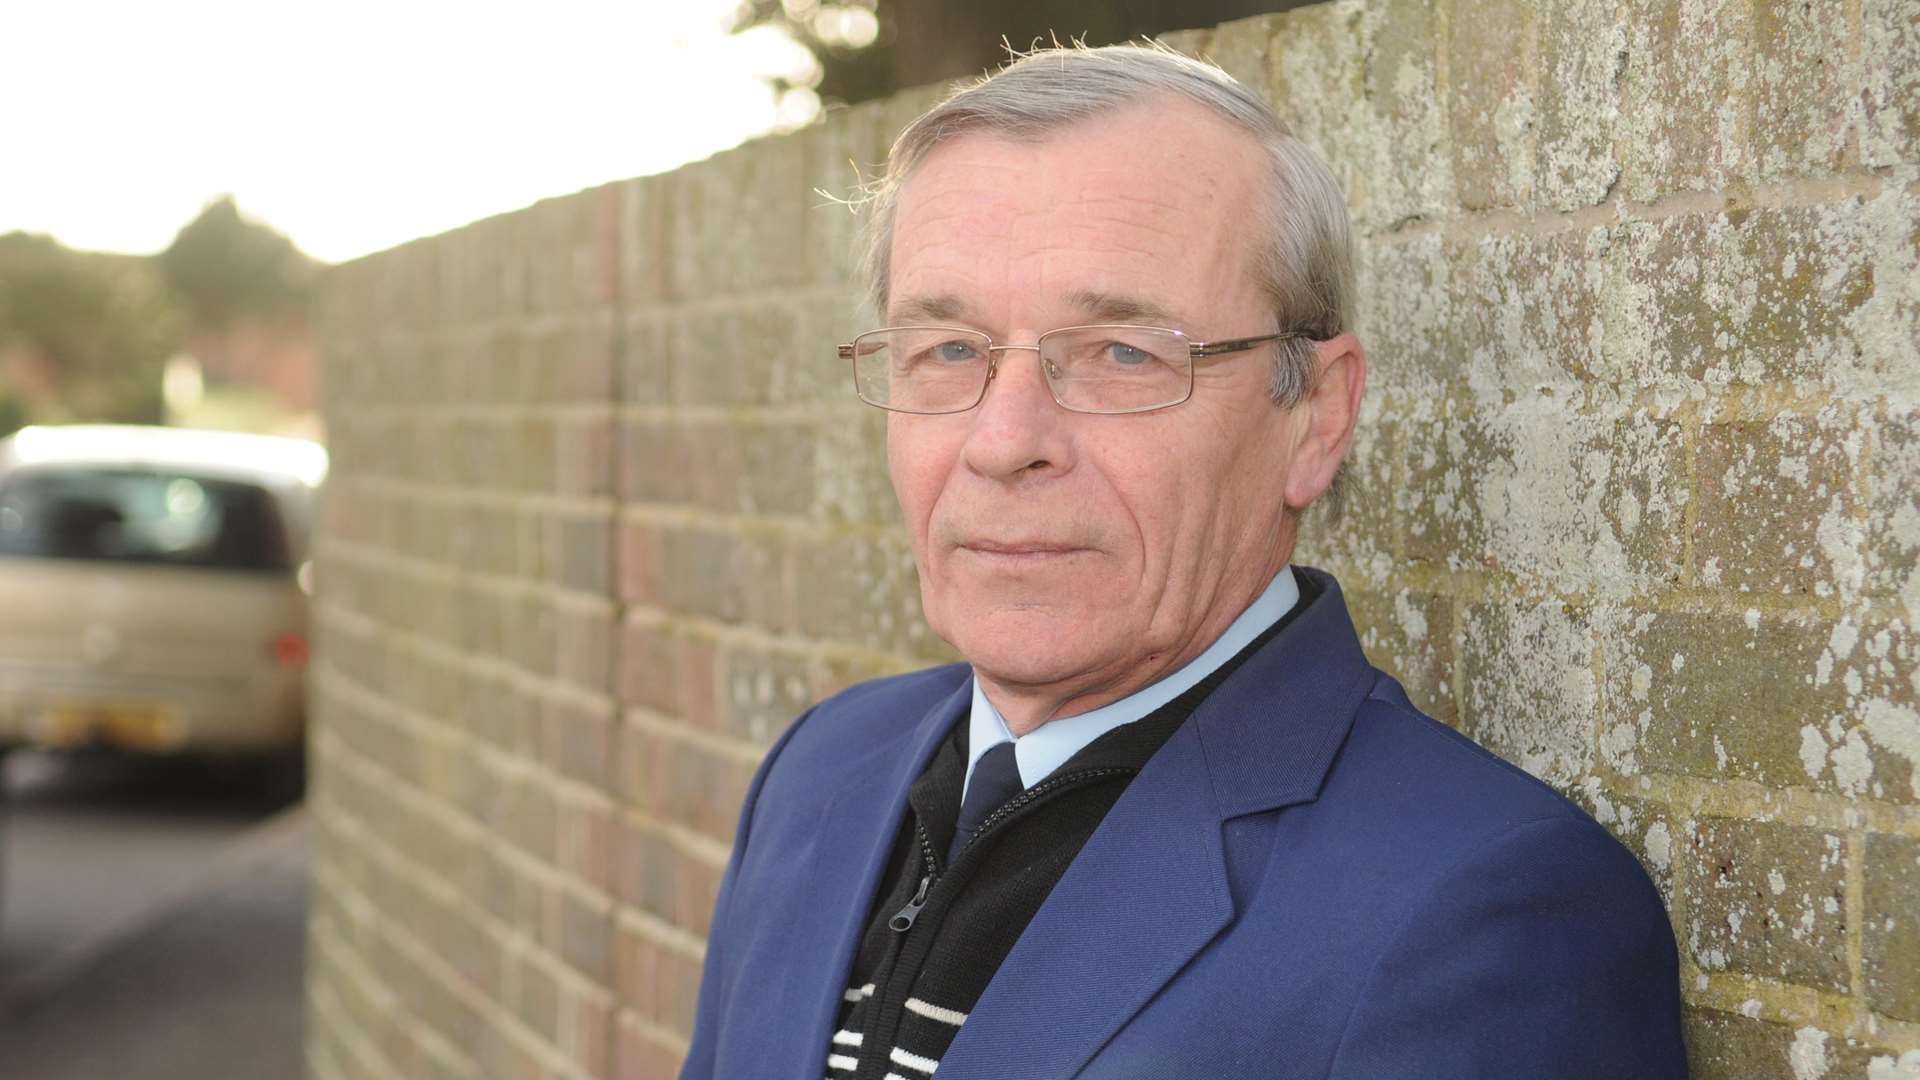 Bob Jones - has walked out of Ukip after Thanet Race row.